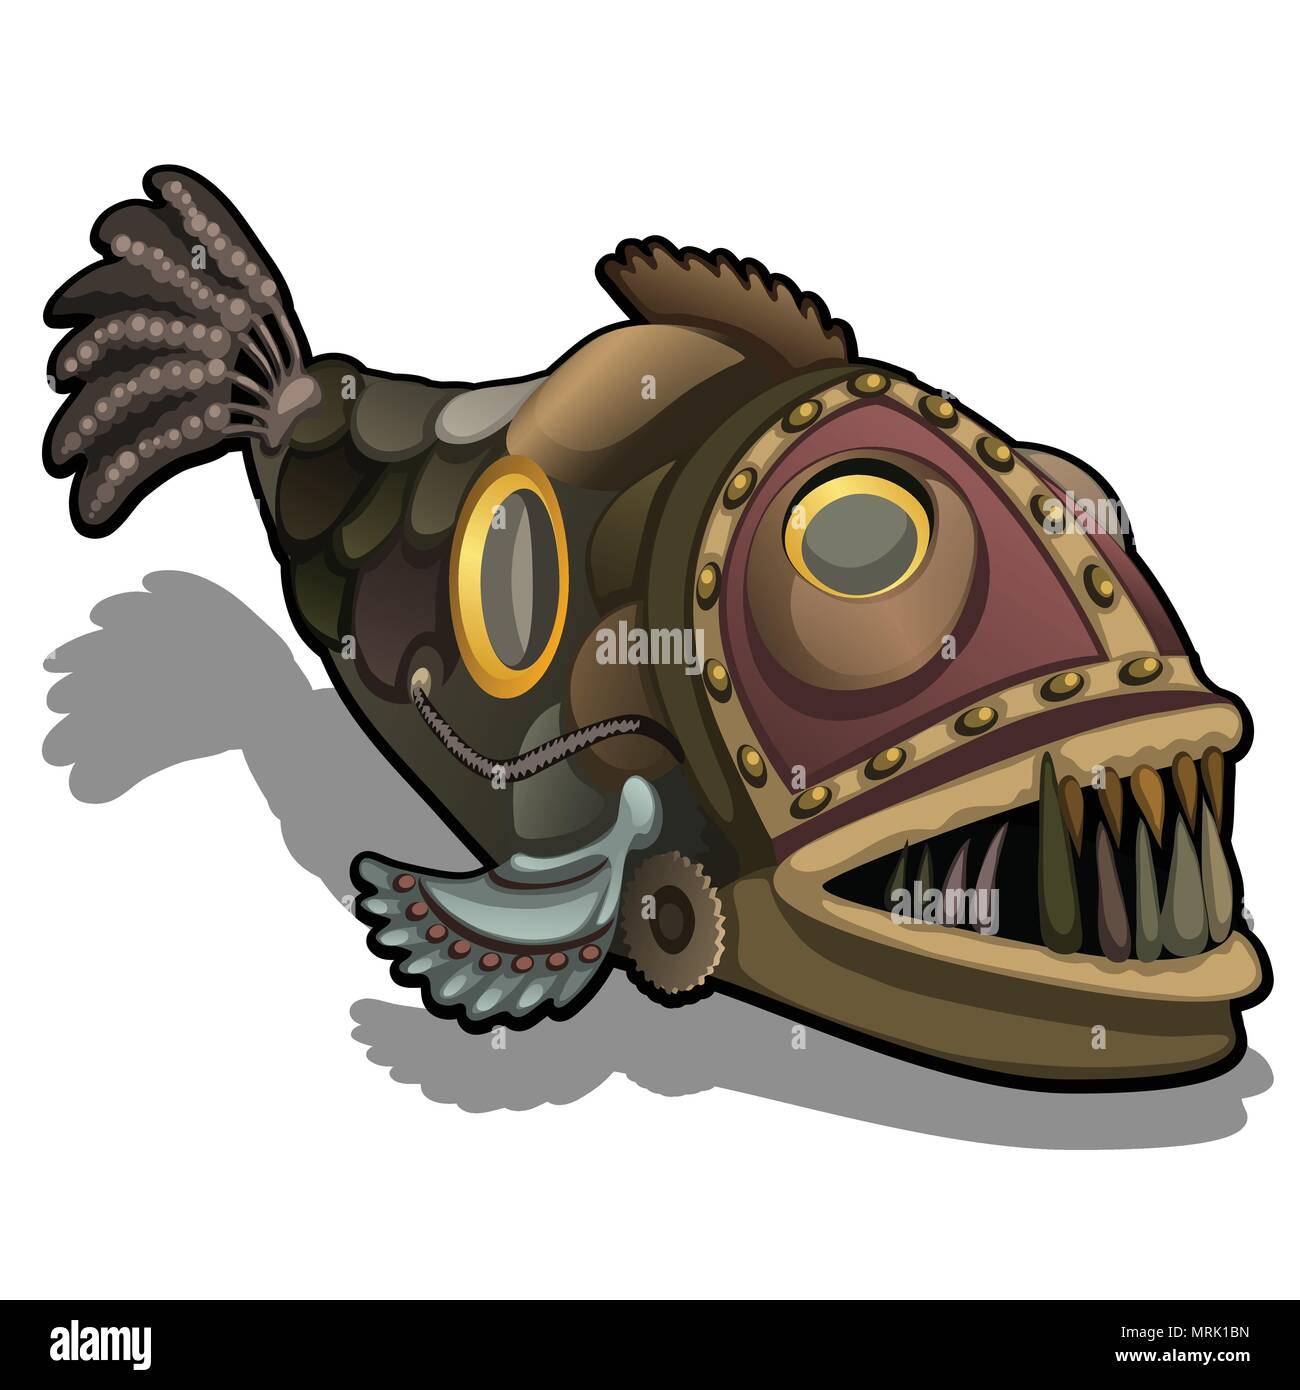 Fangtooth fish in the style of steam punk isolated on white background. Cartoon vector close-up illustration. Stock Vector